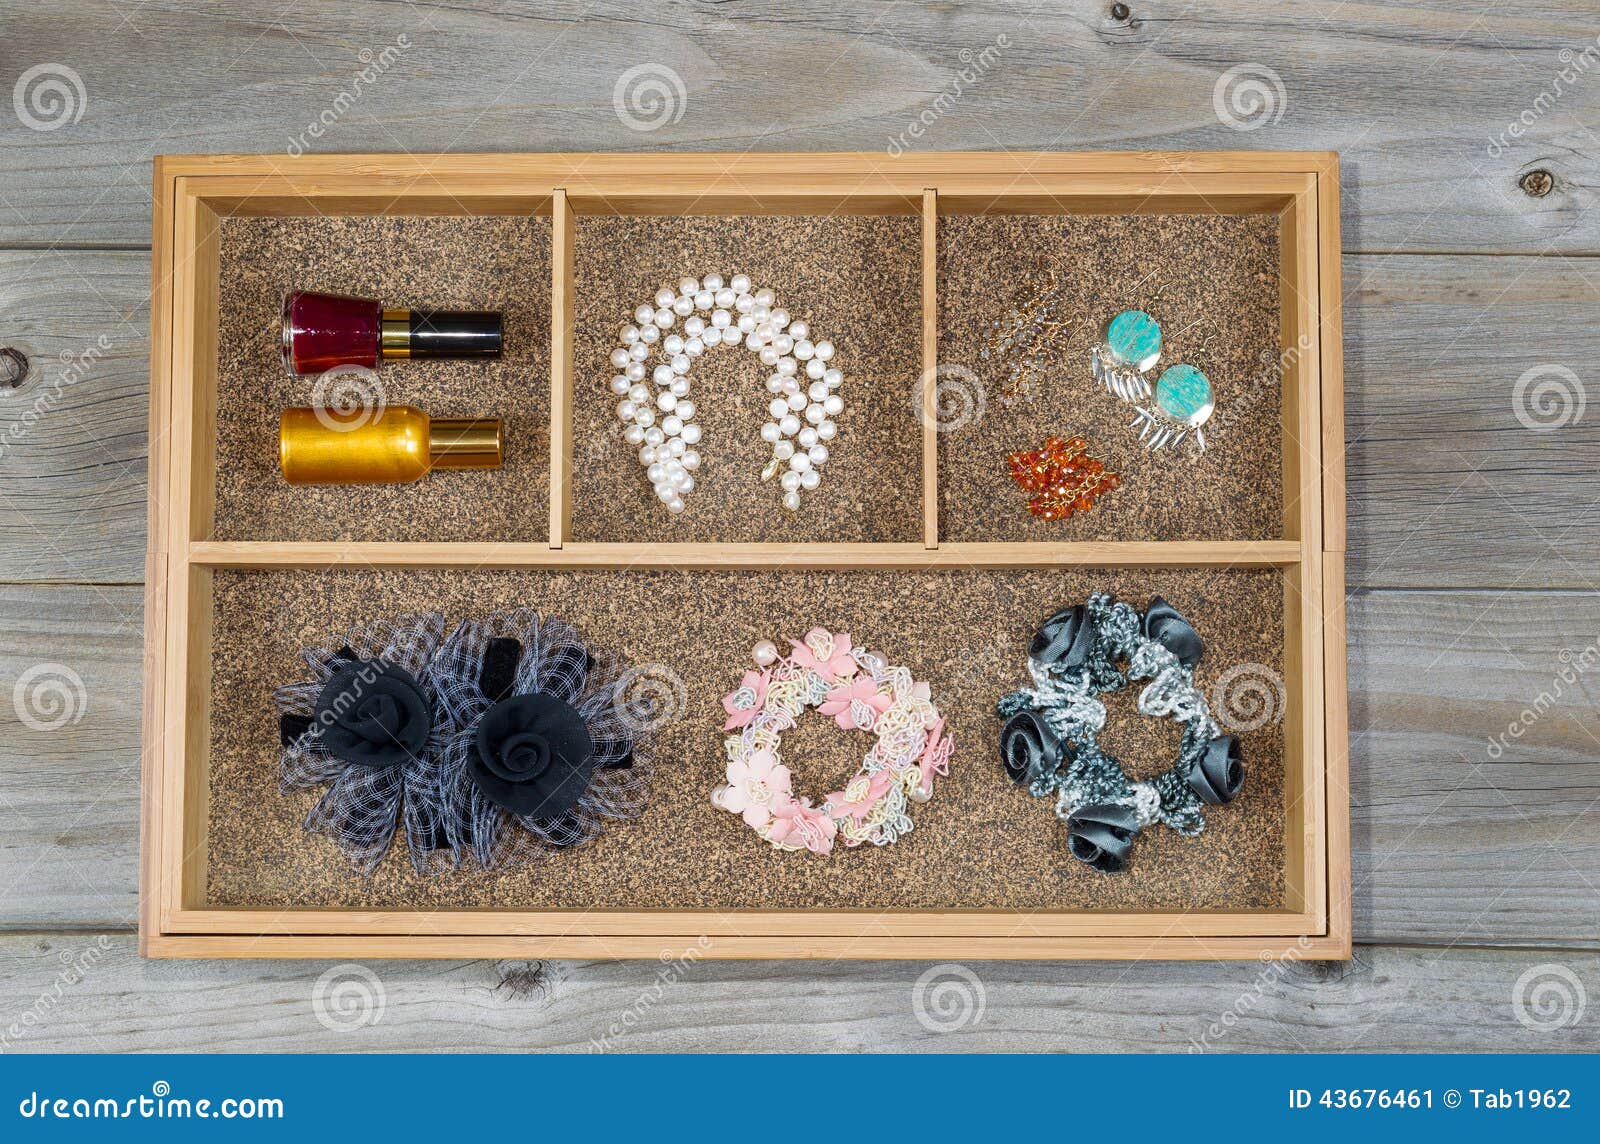 Woman Accessories Placed In Drawer Stock Image Image Of Wood